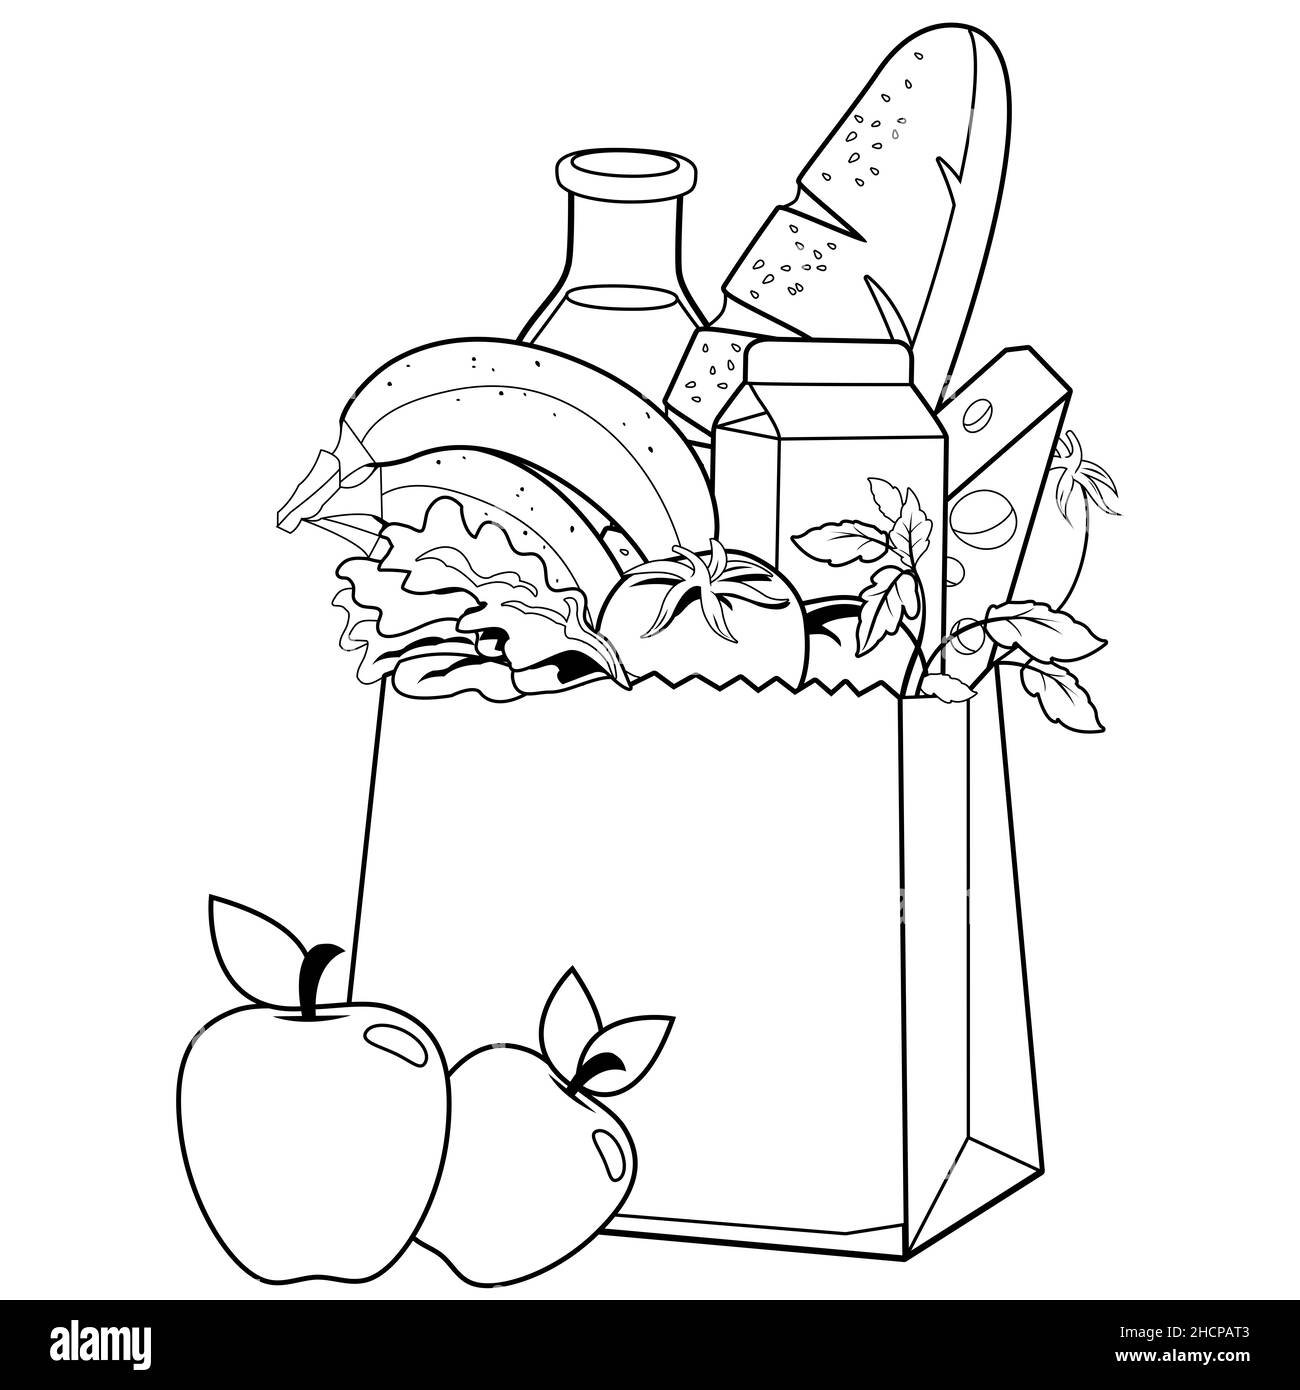 Paper bag with groceries. Milk, bread, fruits, vegetables and cheese. Black and white coloring page. Stock Photo